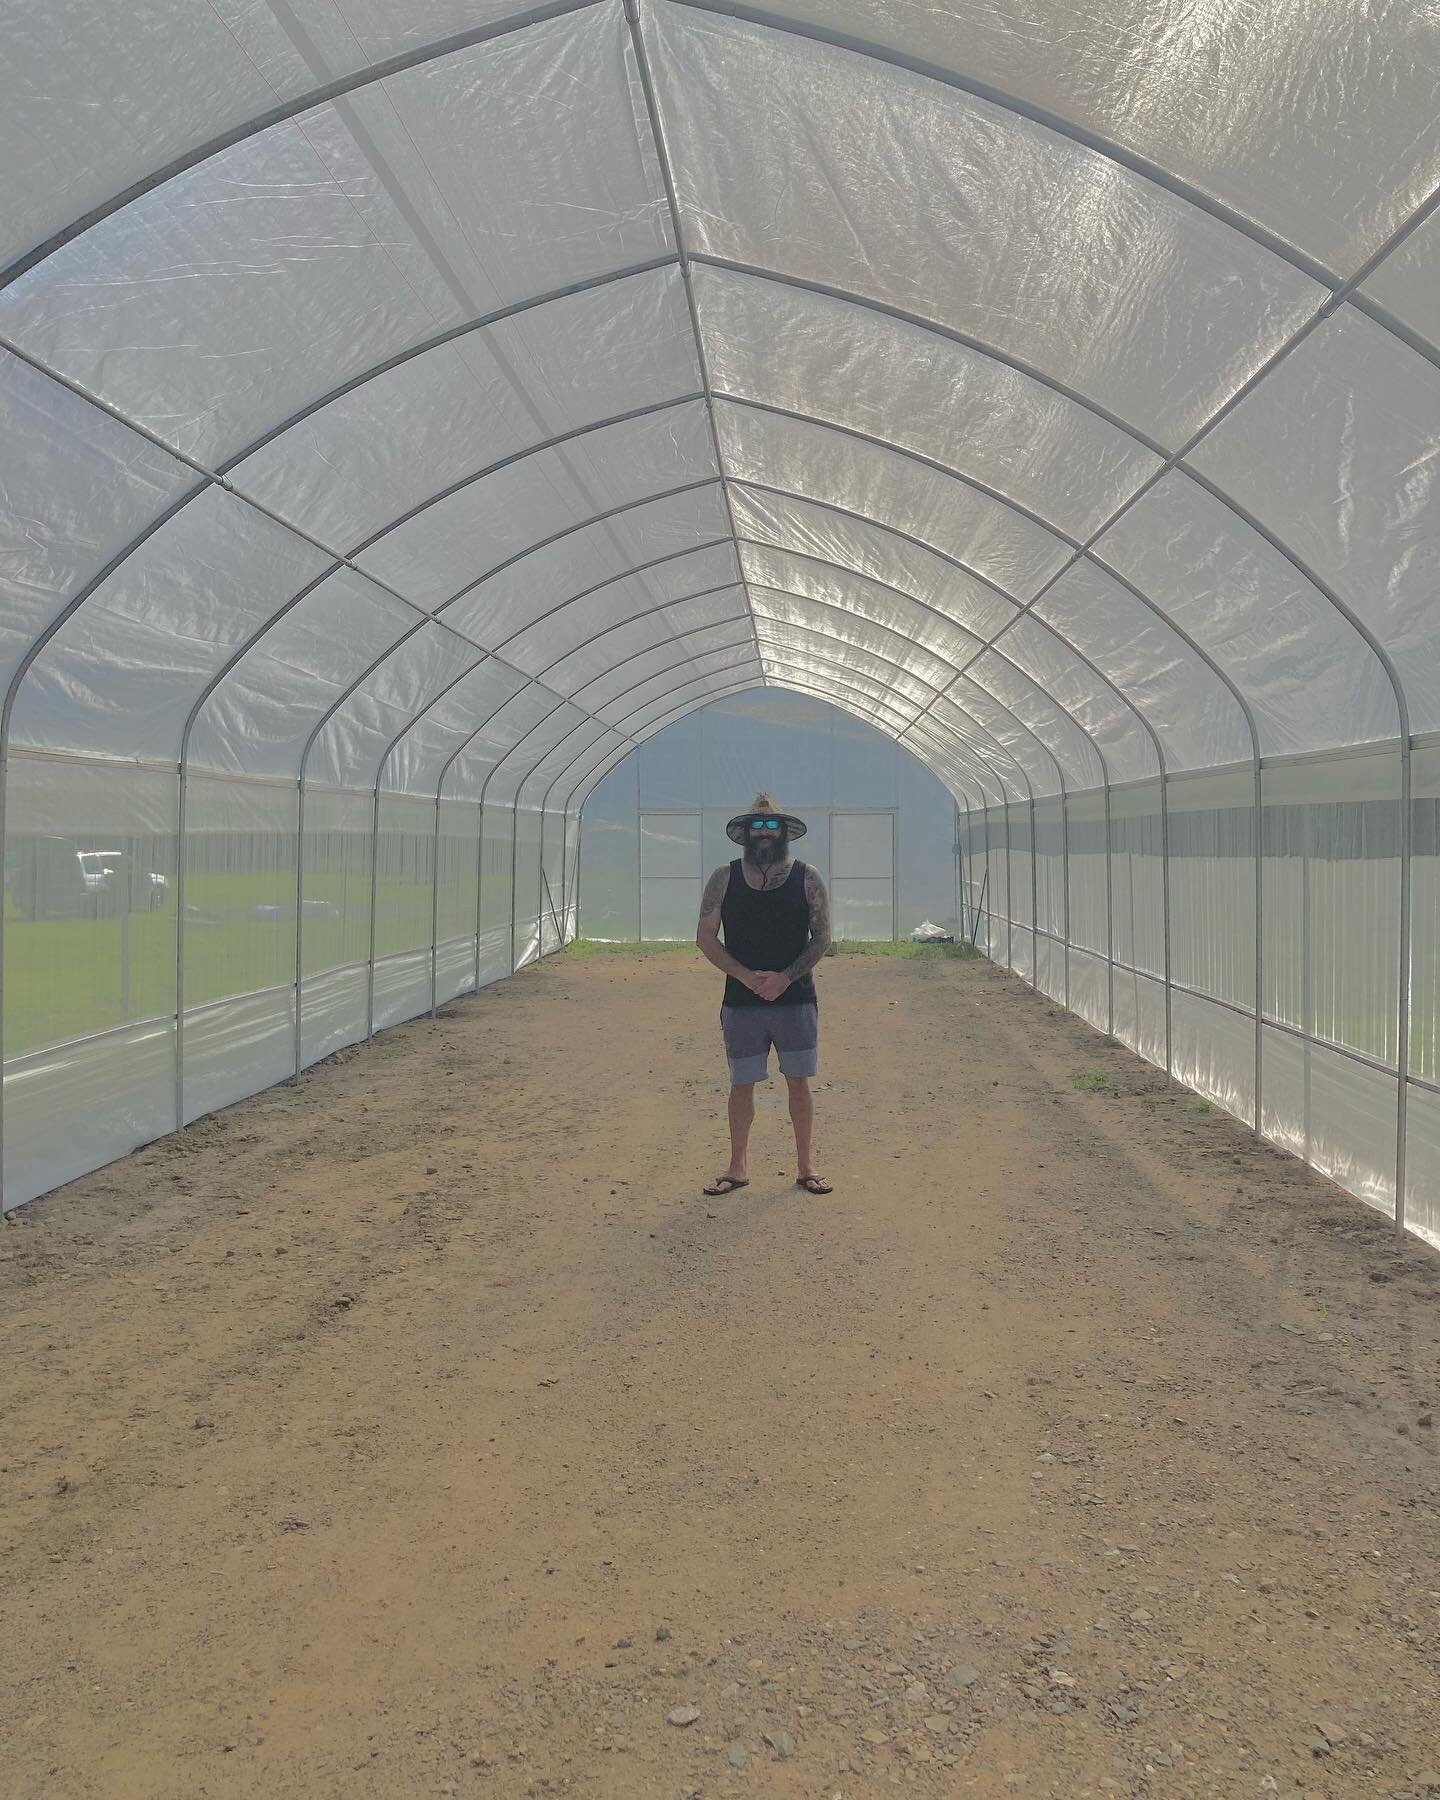 Farmer Mick and his family are pretty stoked with their new Rural V2 Growtunnel. 

Our friendly construction team put this 6m x 25m tunnel up in 4 days start to finish.

Nestled near the glass house mountains on the Sunshine Coast this beauty will so